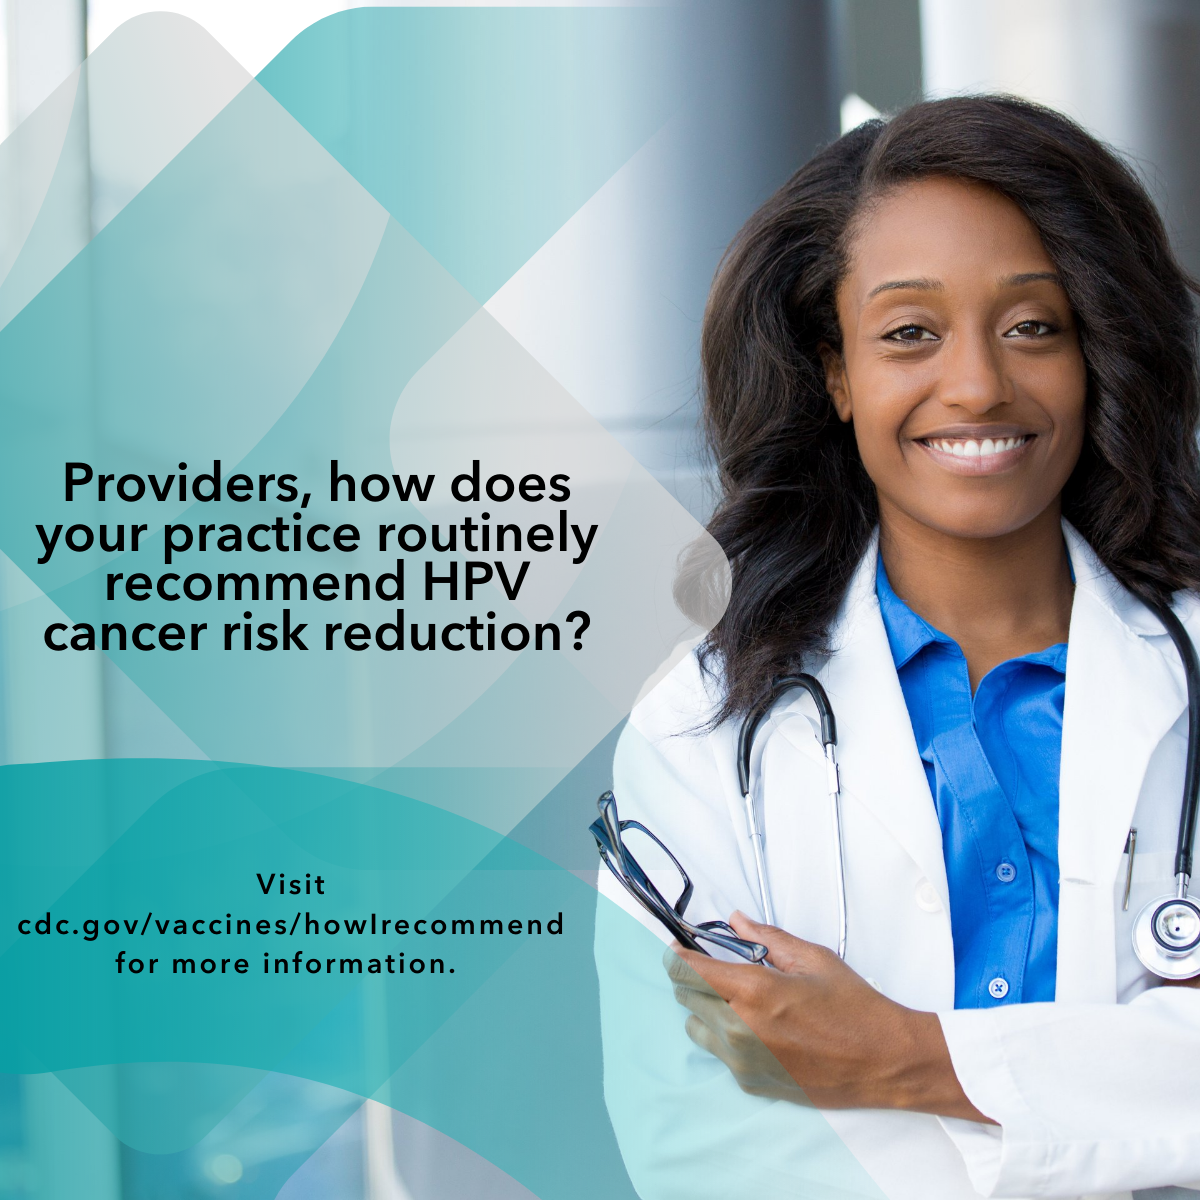 Image of Black female doctor. Overlay text reads: Providers, how does your practice routinely recommend HPV cancer risk reduction?